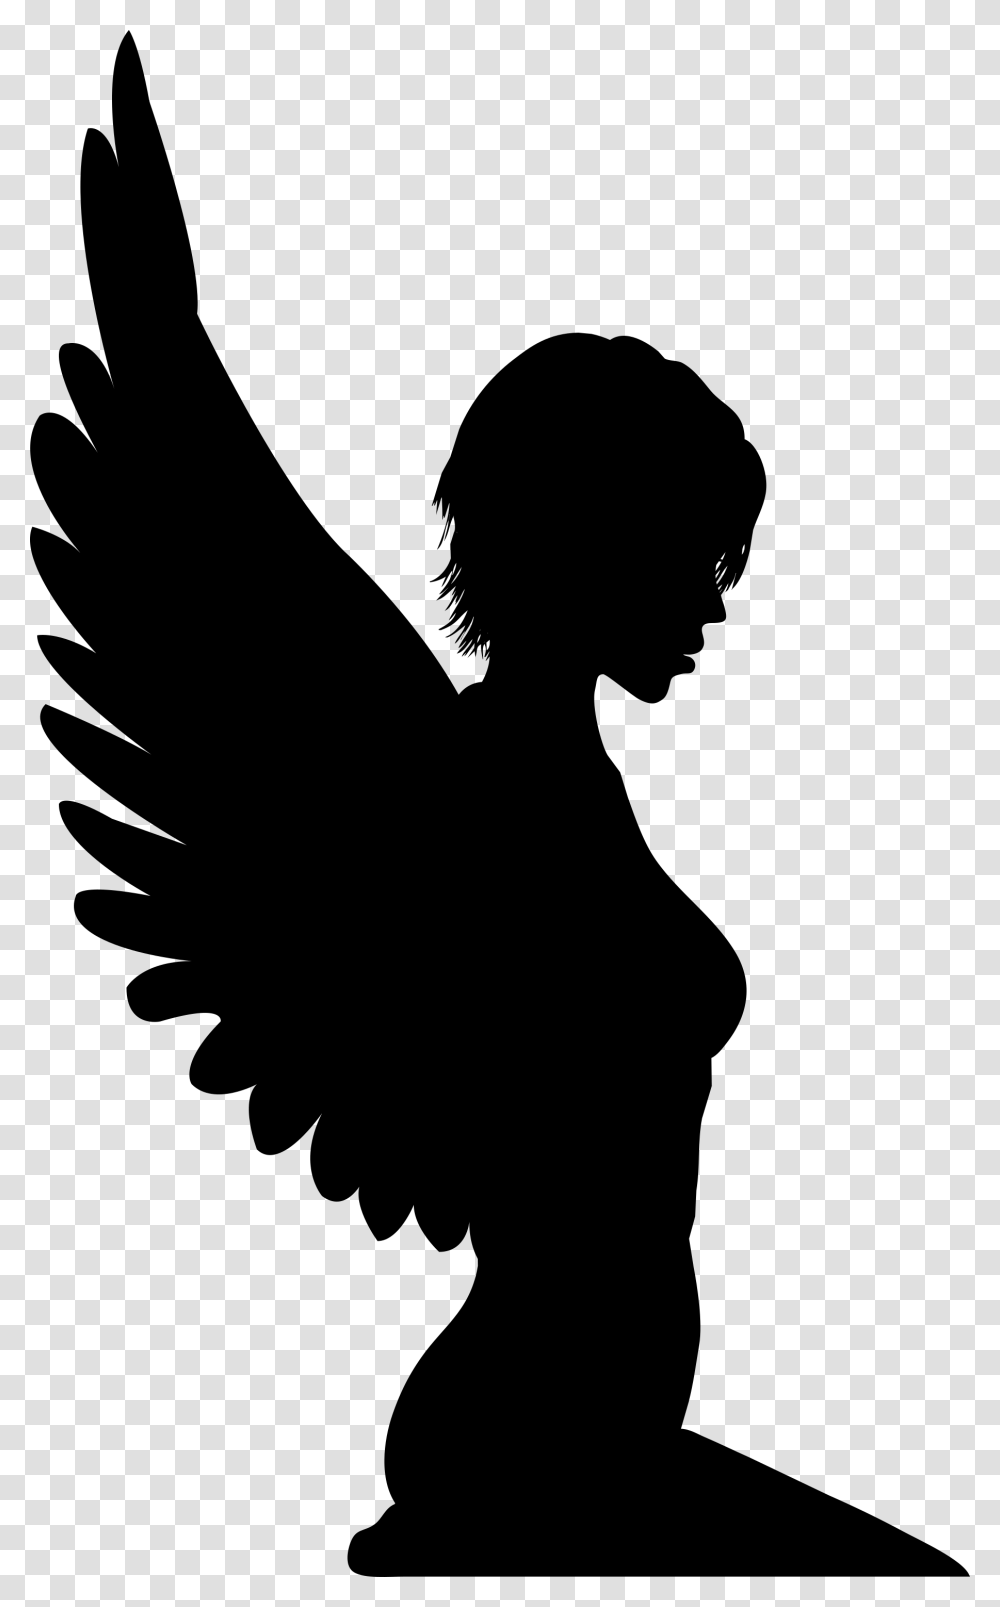 Woman With Wings Silhouette Silhouette Of Woman With Wings, Gray, World Of Warcraft Transparent Png